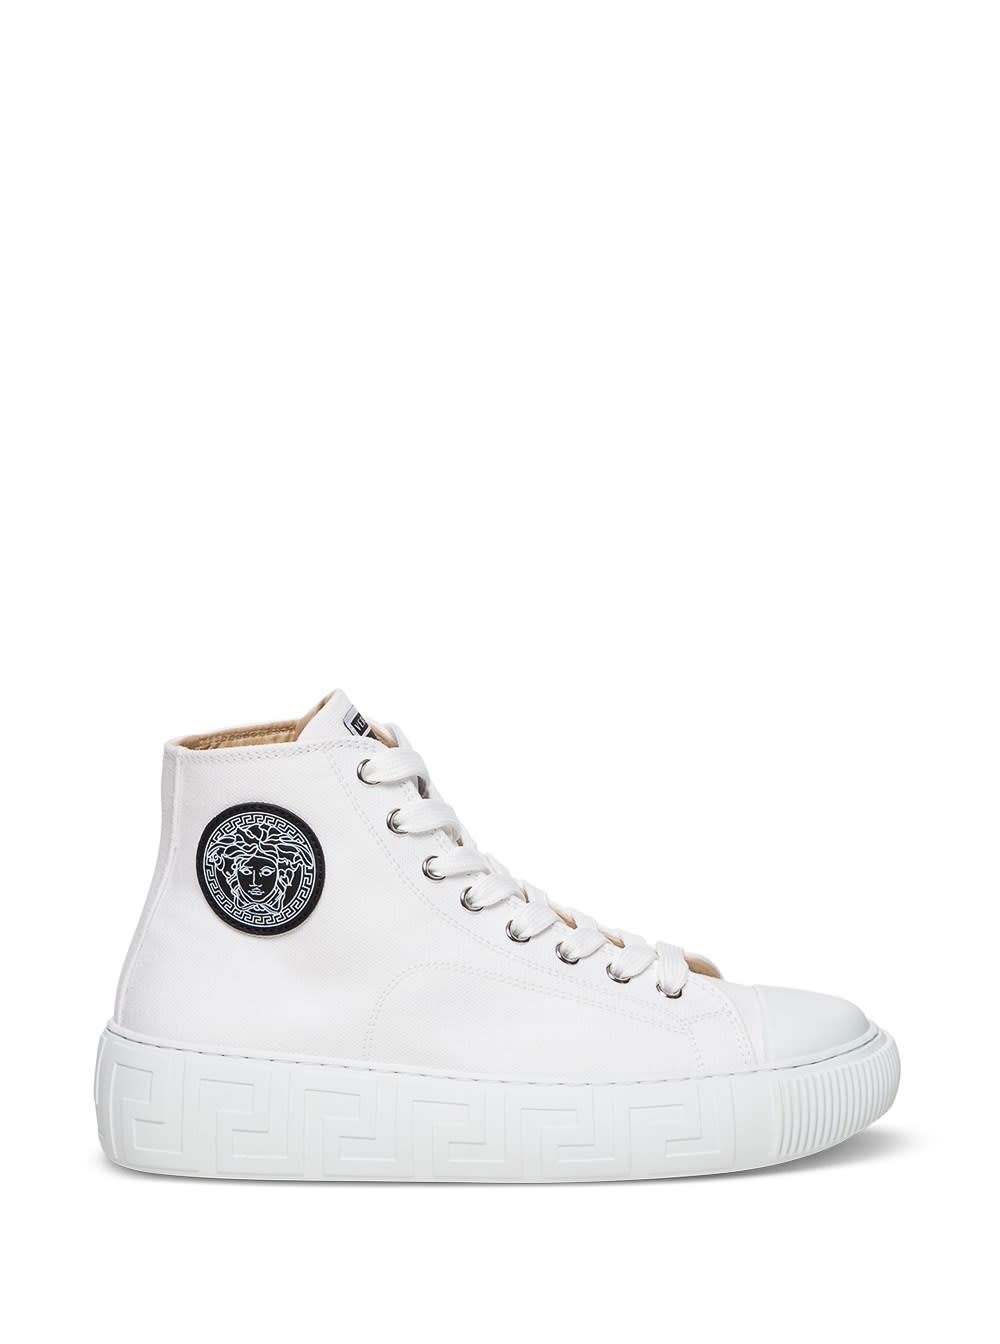 Versace GRECA SNEAKERS IN WHITE CANVAS WITH LOGO